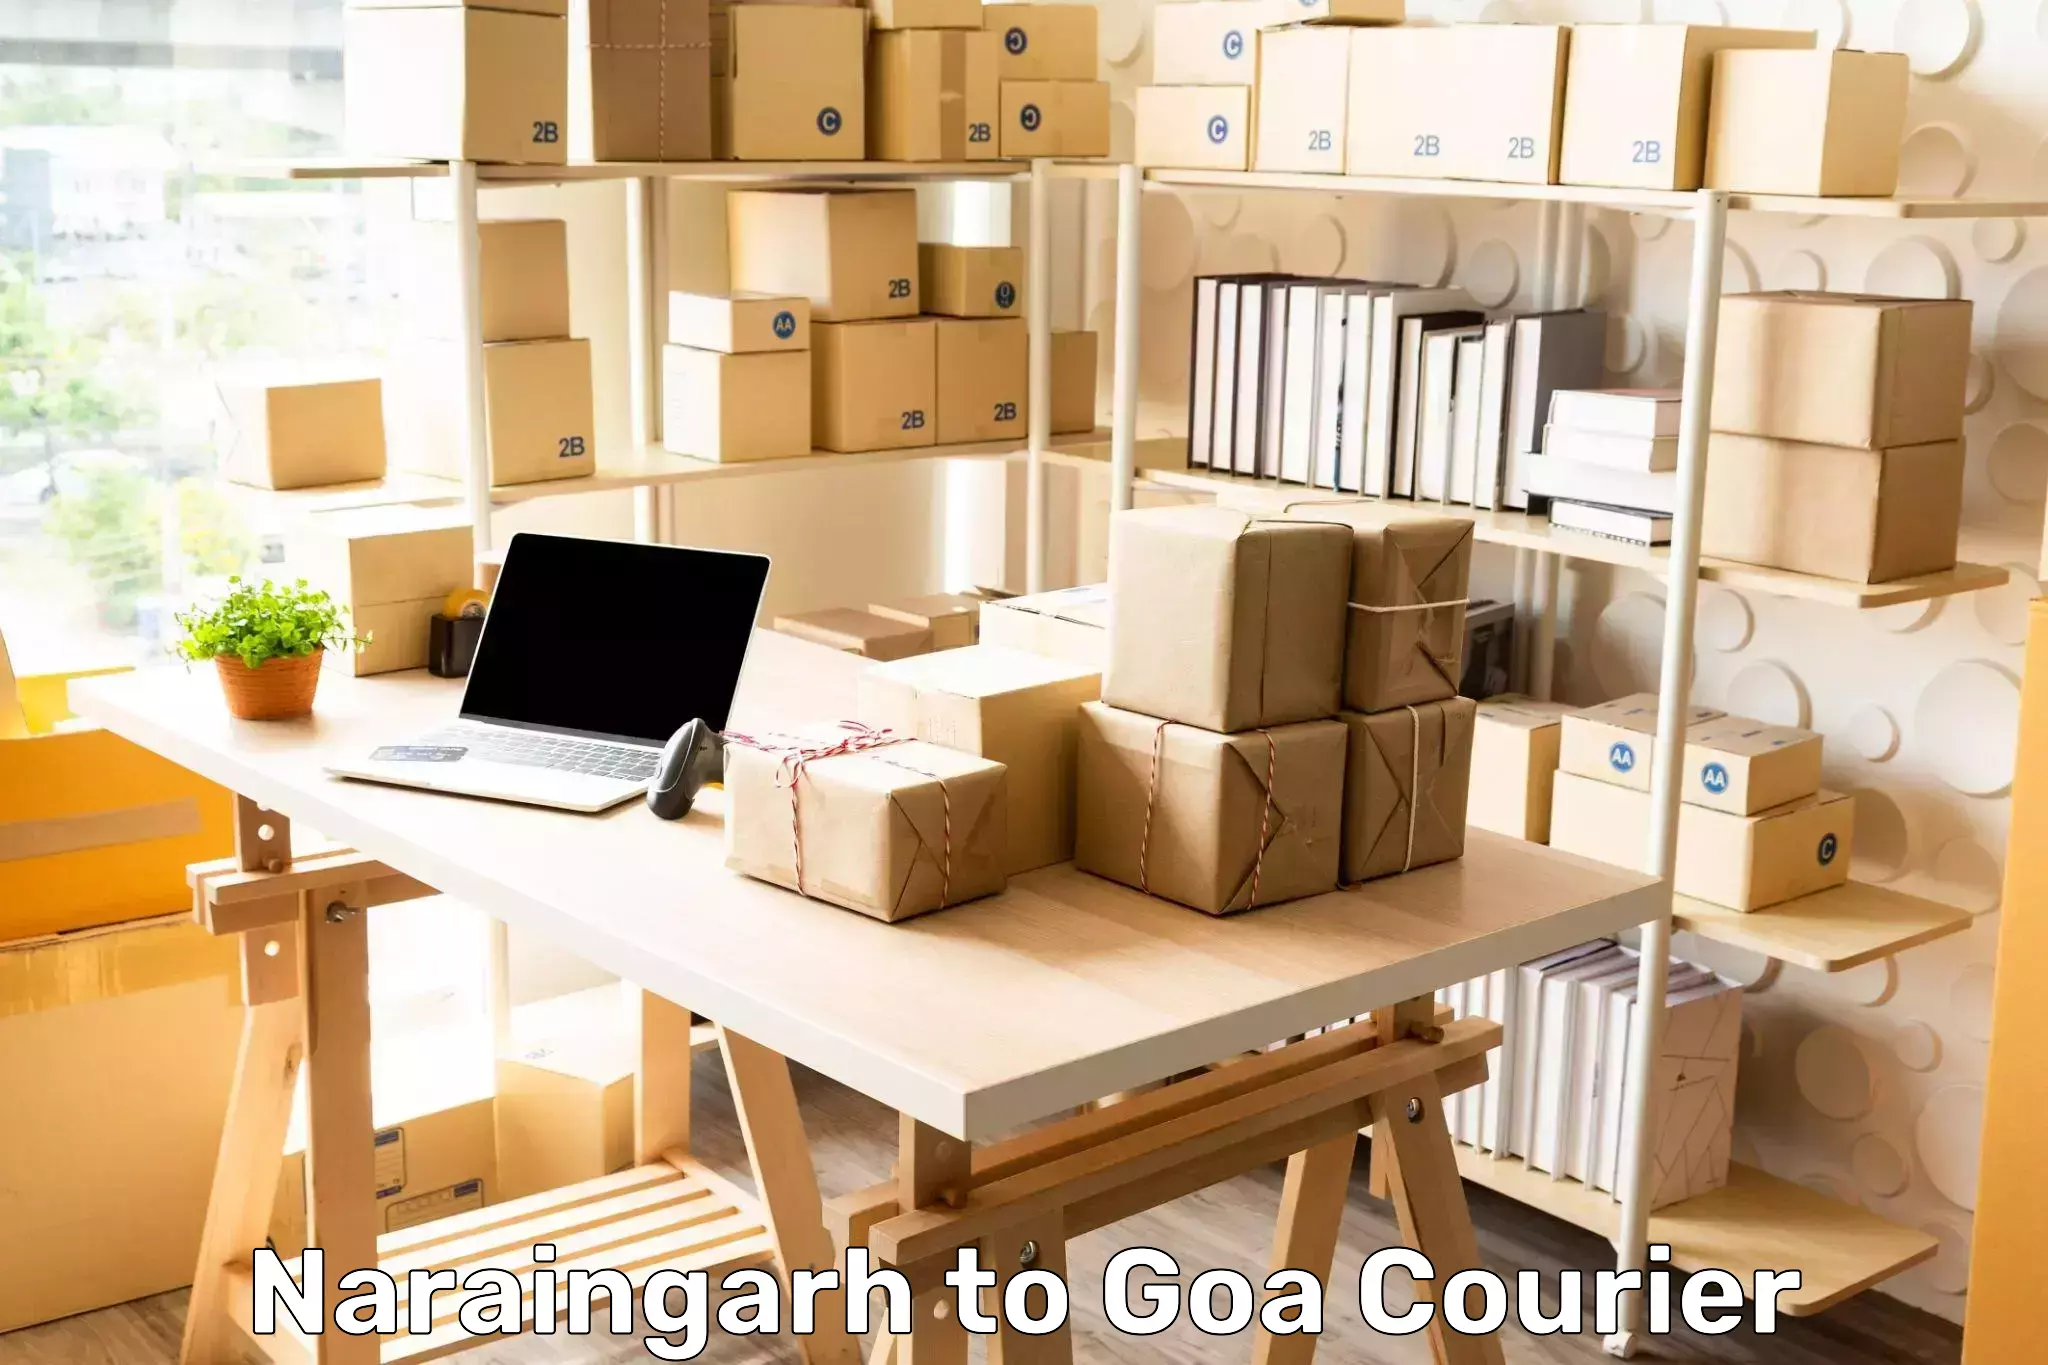 Business delivery service Naraingarh to Goa